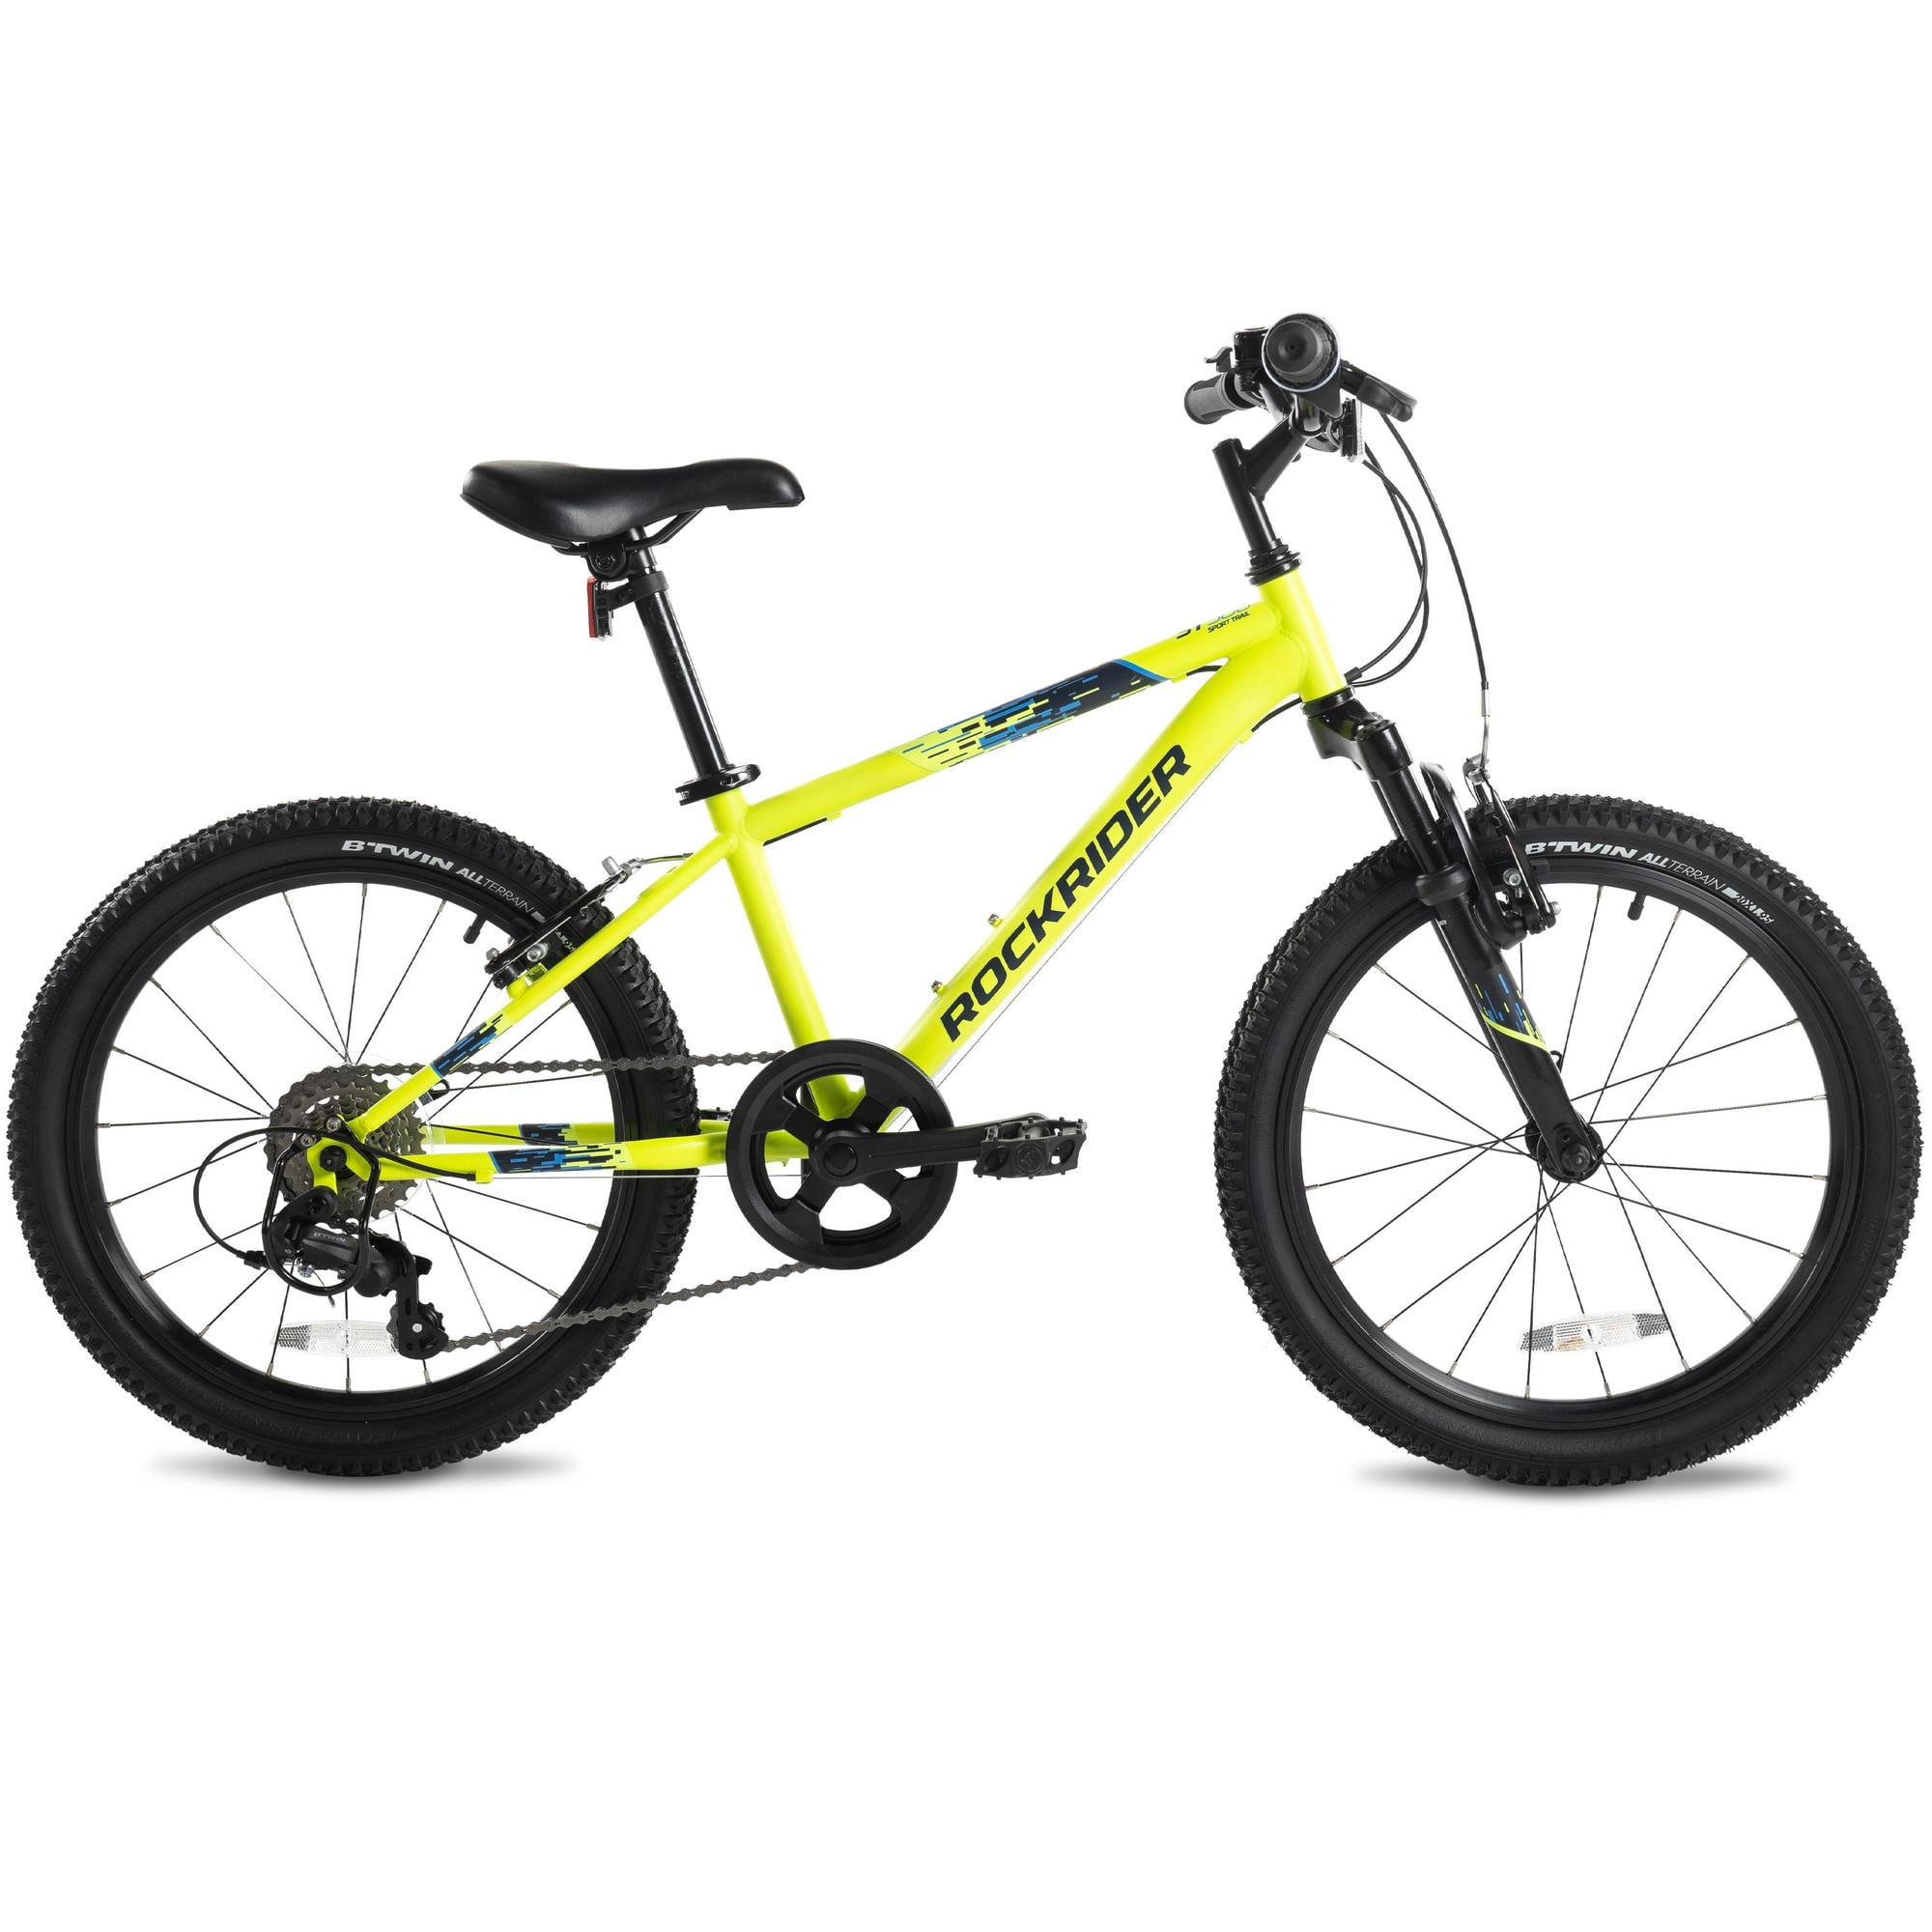 decathlon bicycle for kids